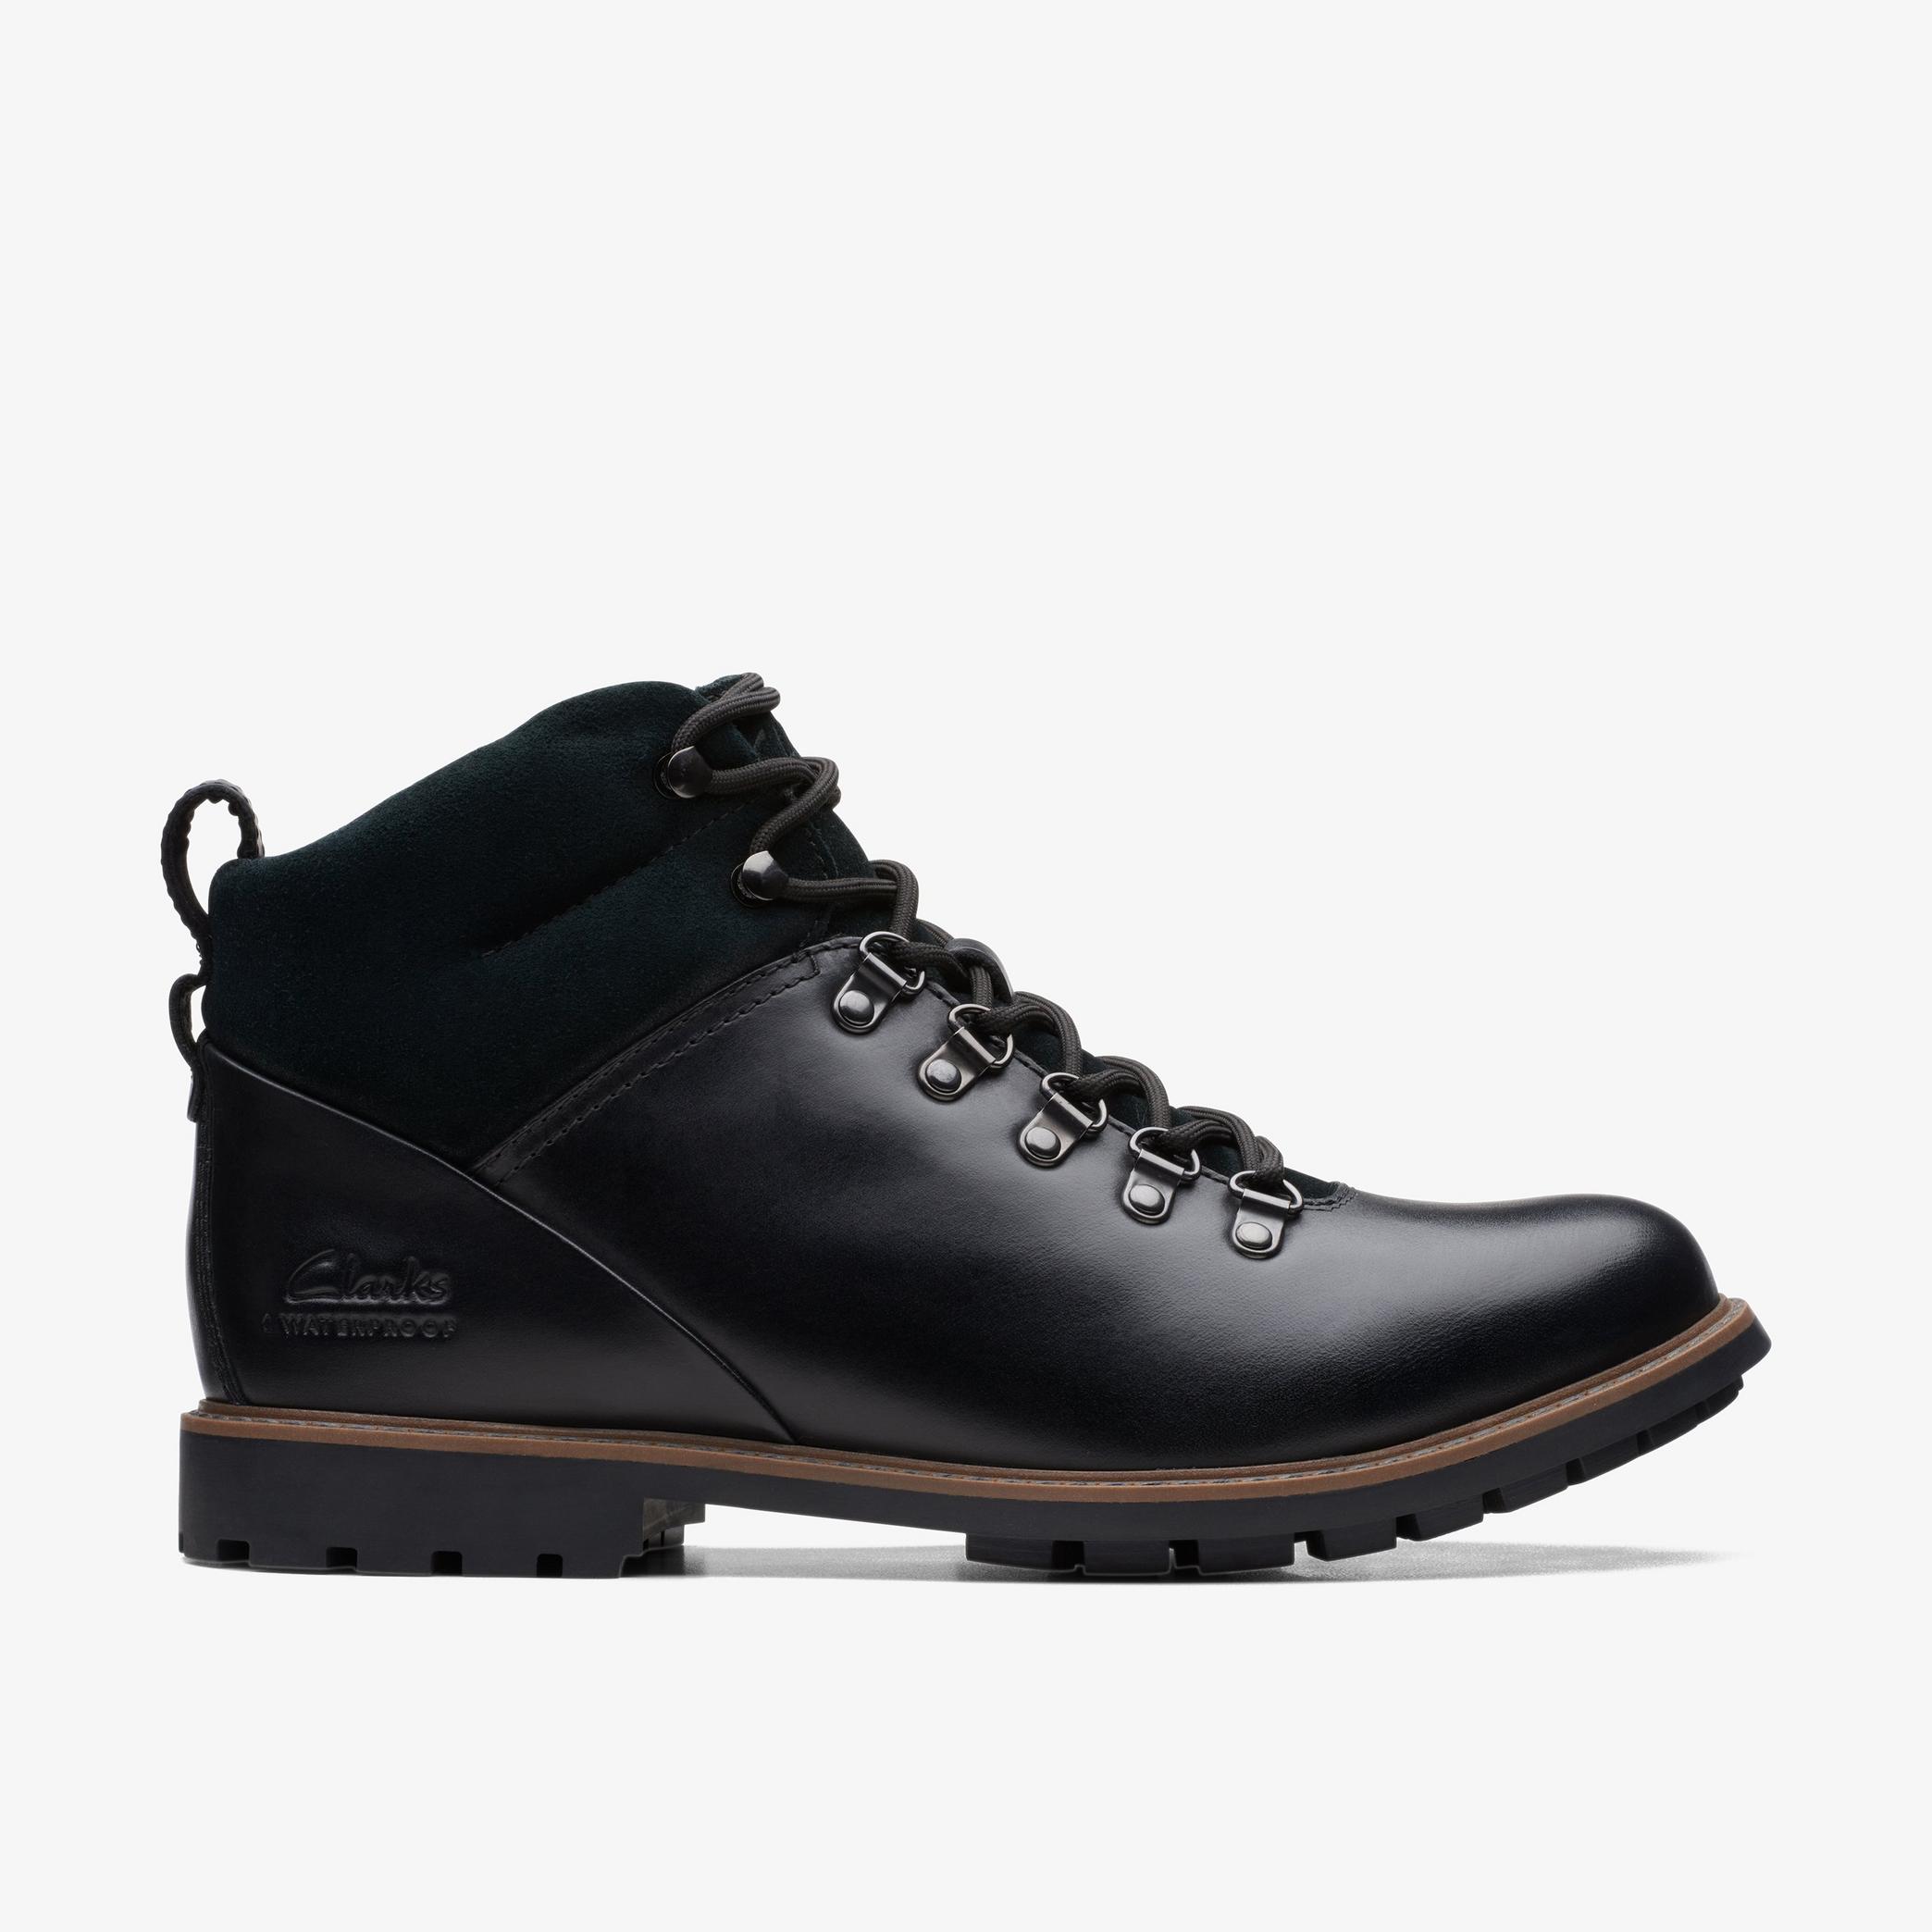 Westcombe Hi Waterproof Black Warmlined Leather Ankle Boots, view 1 of 6